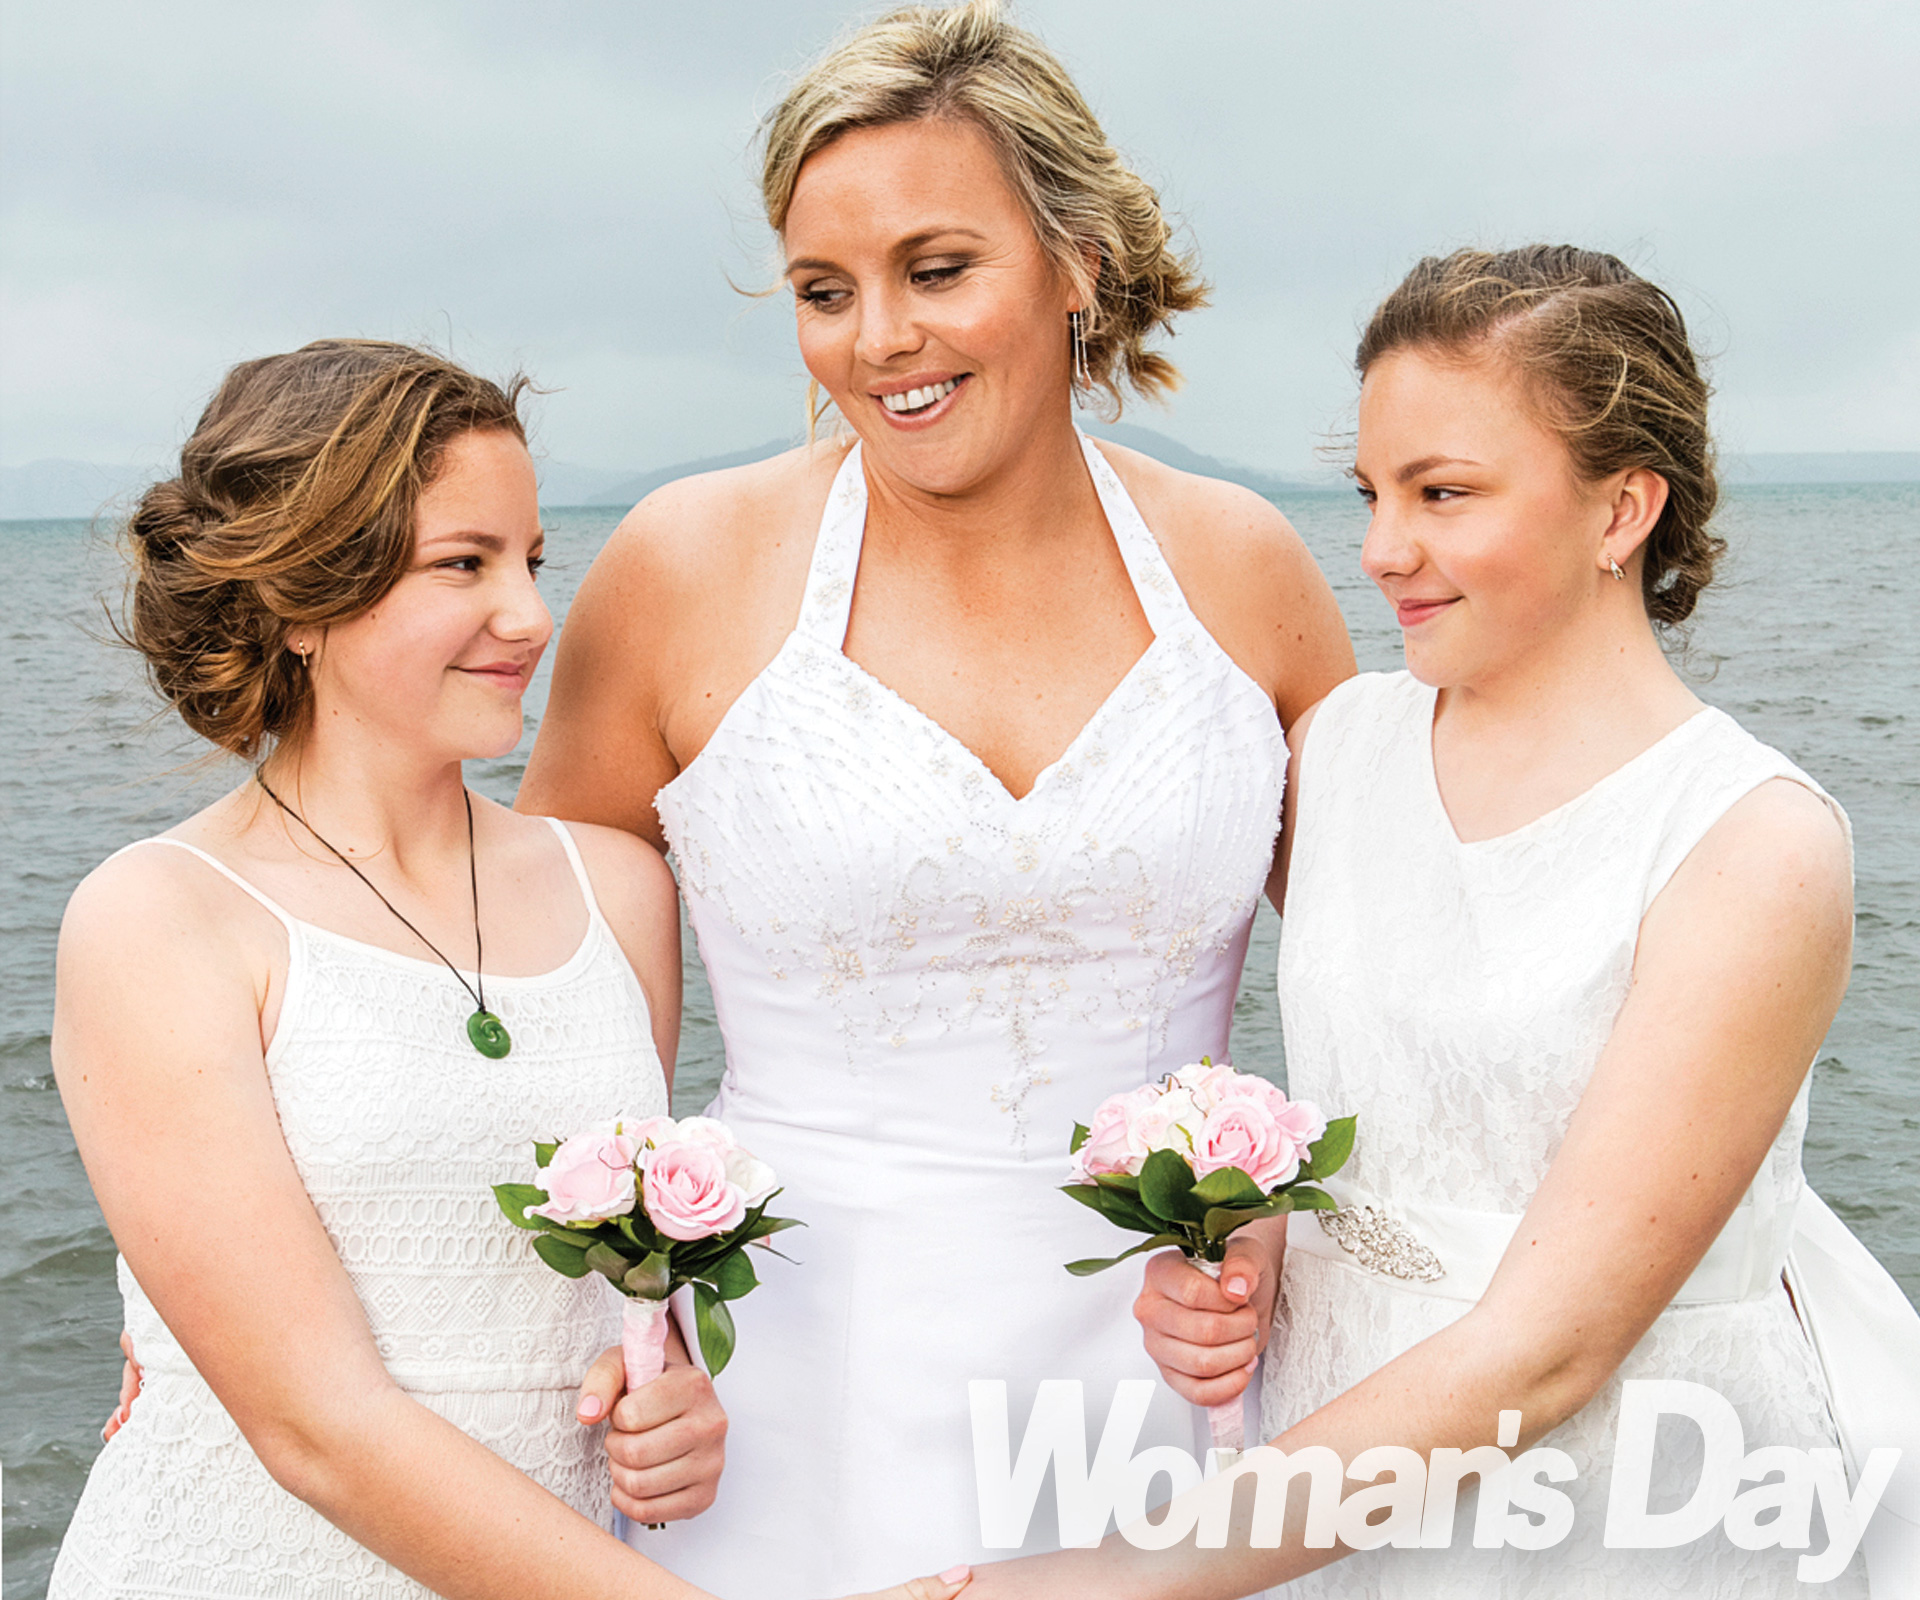 Surprise wedding: Miracle twins’ dream day